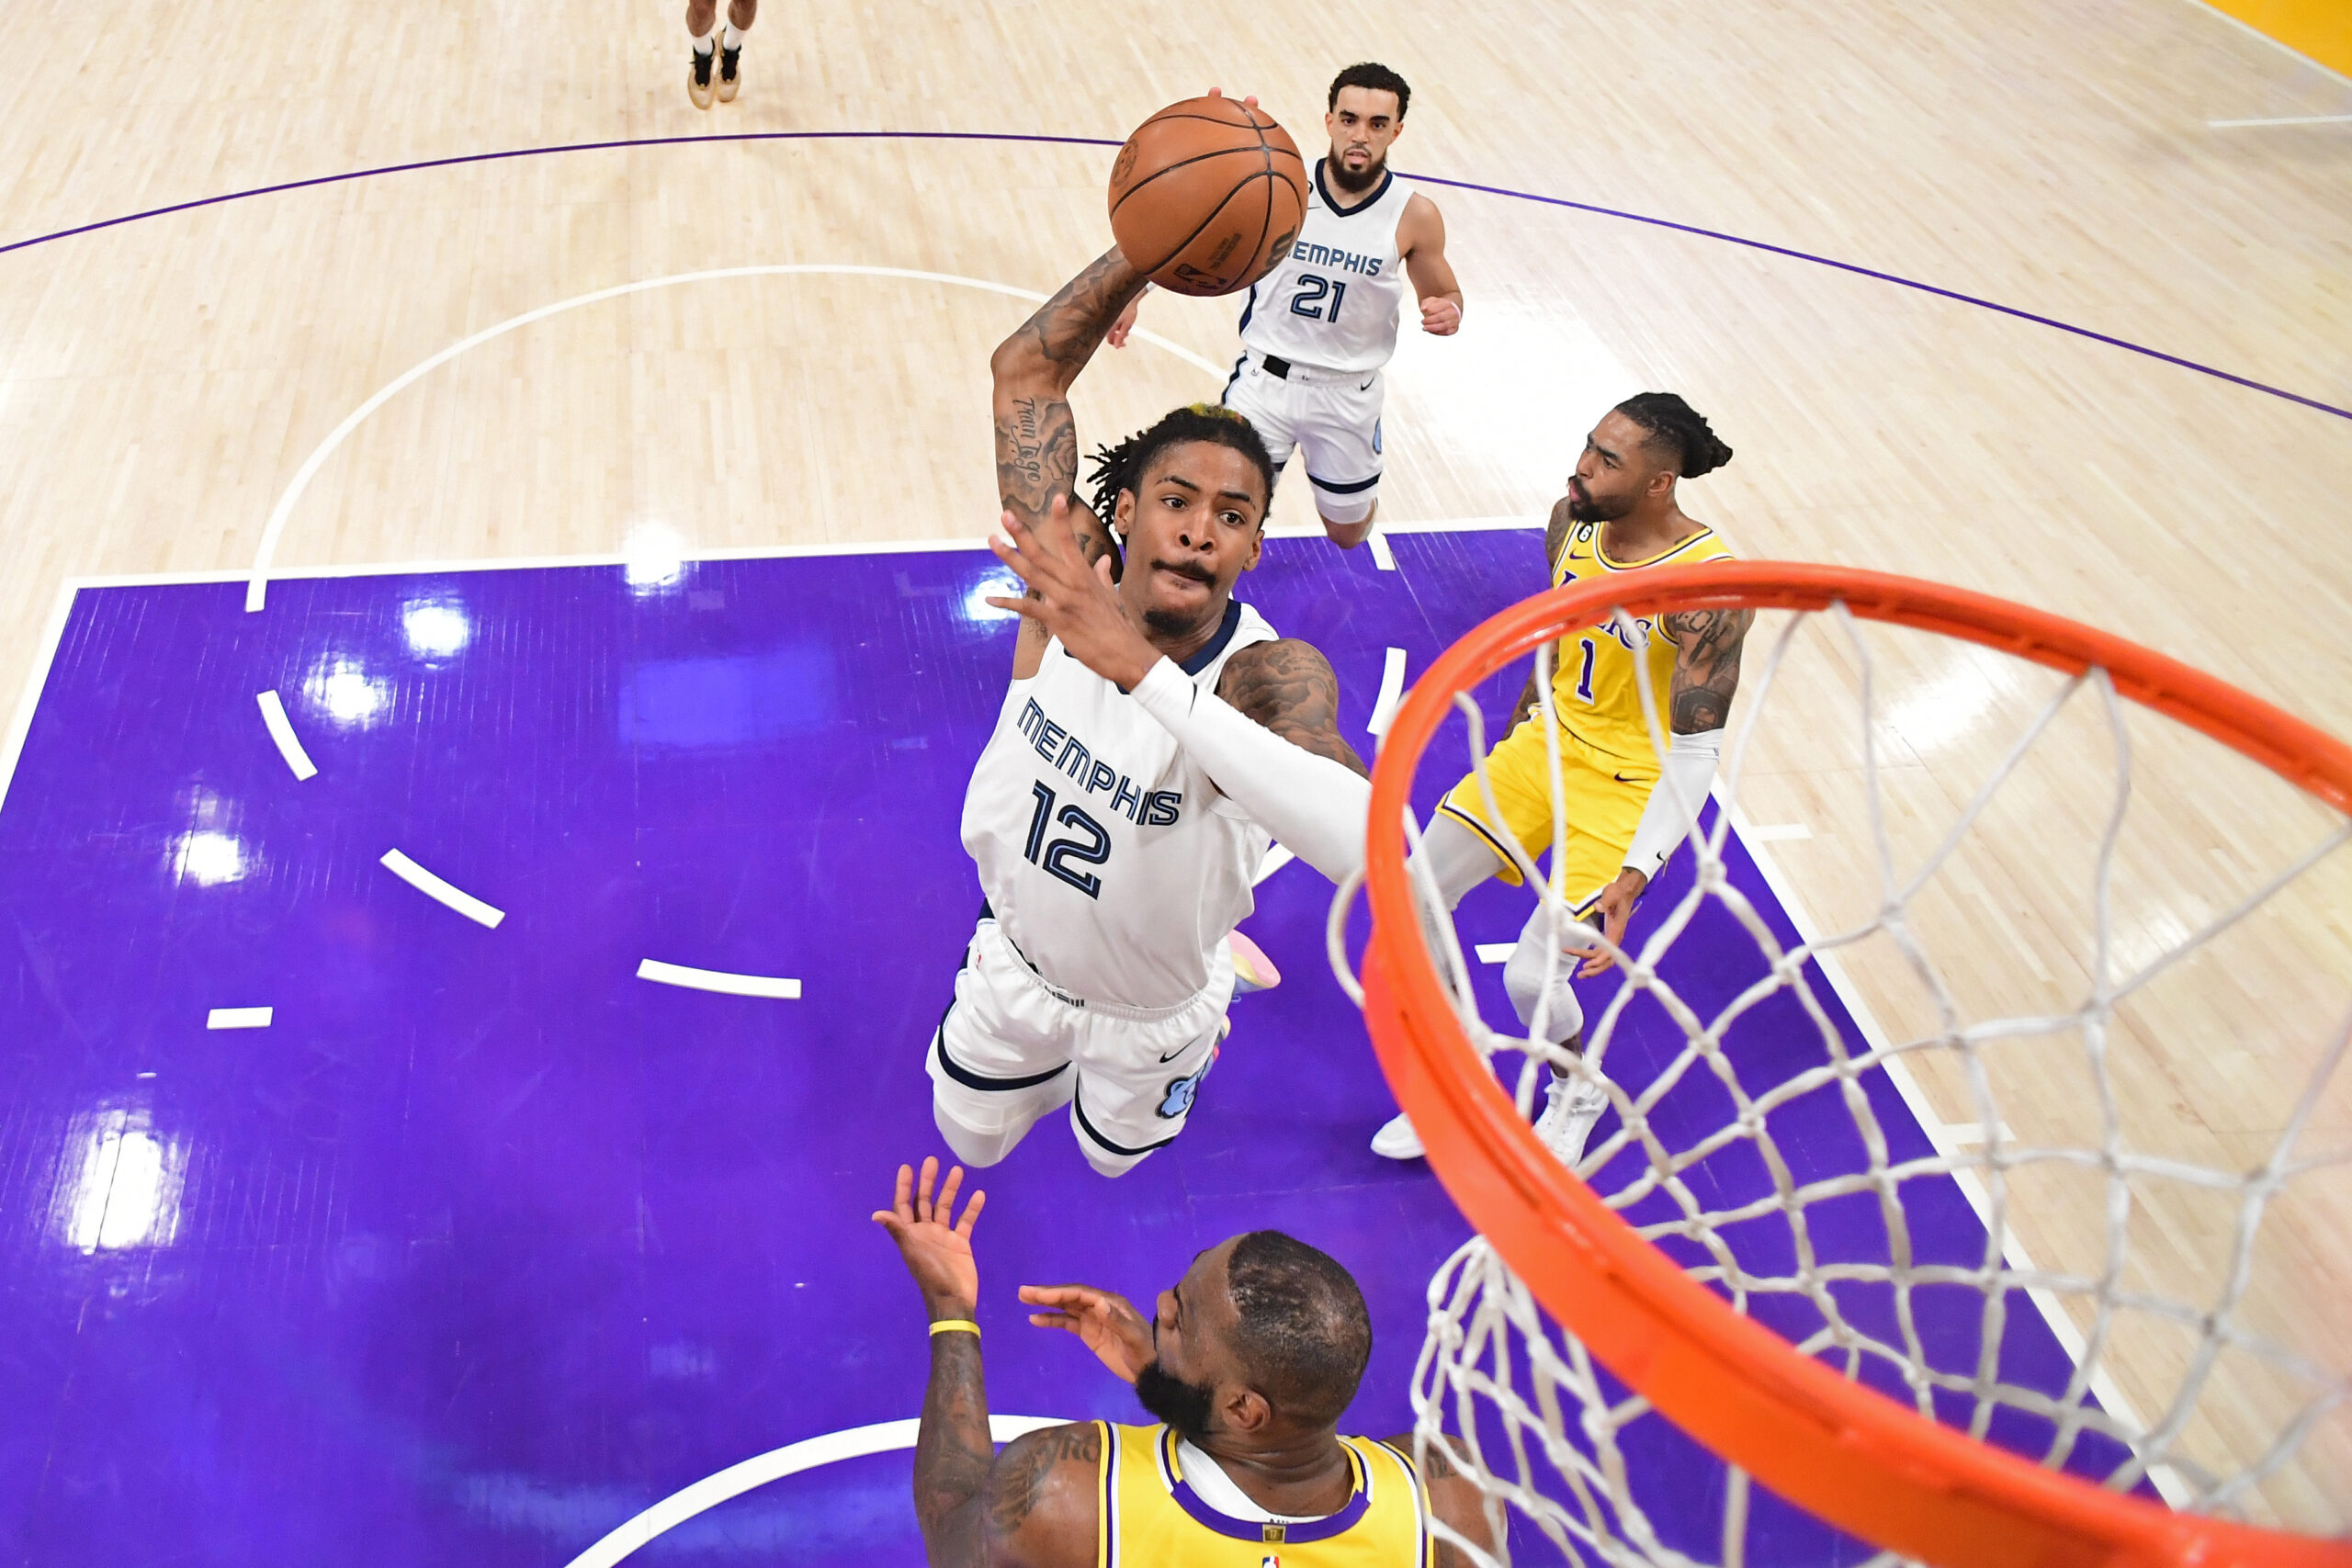 LOS ANGELES, CA - APRIL 28: Ja Morant #12 of the Memphis Grizzlies drives to the basket against the Los Angeles Lakers during round One Game Six of the 2023 NBA Playoffs on April 28, 2023 at Crypto.Com Arena in Los Angeles, California. NOTE TO USER: User expressly acknowledges and agrees that, by downloading and/or using this Photograph, user is consenting to the terms and conditions of the Getty Images License Agreement. Mandatory Copyright Notice: Copyright 2023 NBAE (Photo by Adam Pantozzi/NBAE via Getty Images)